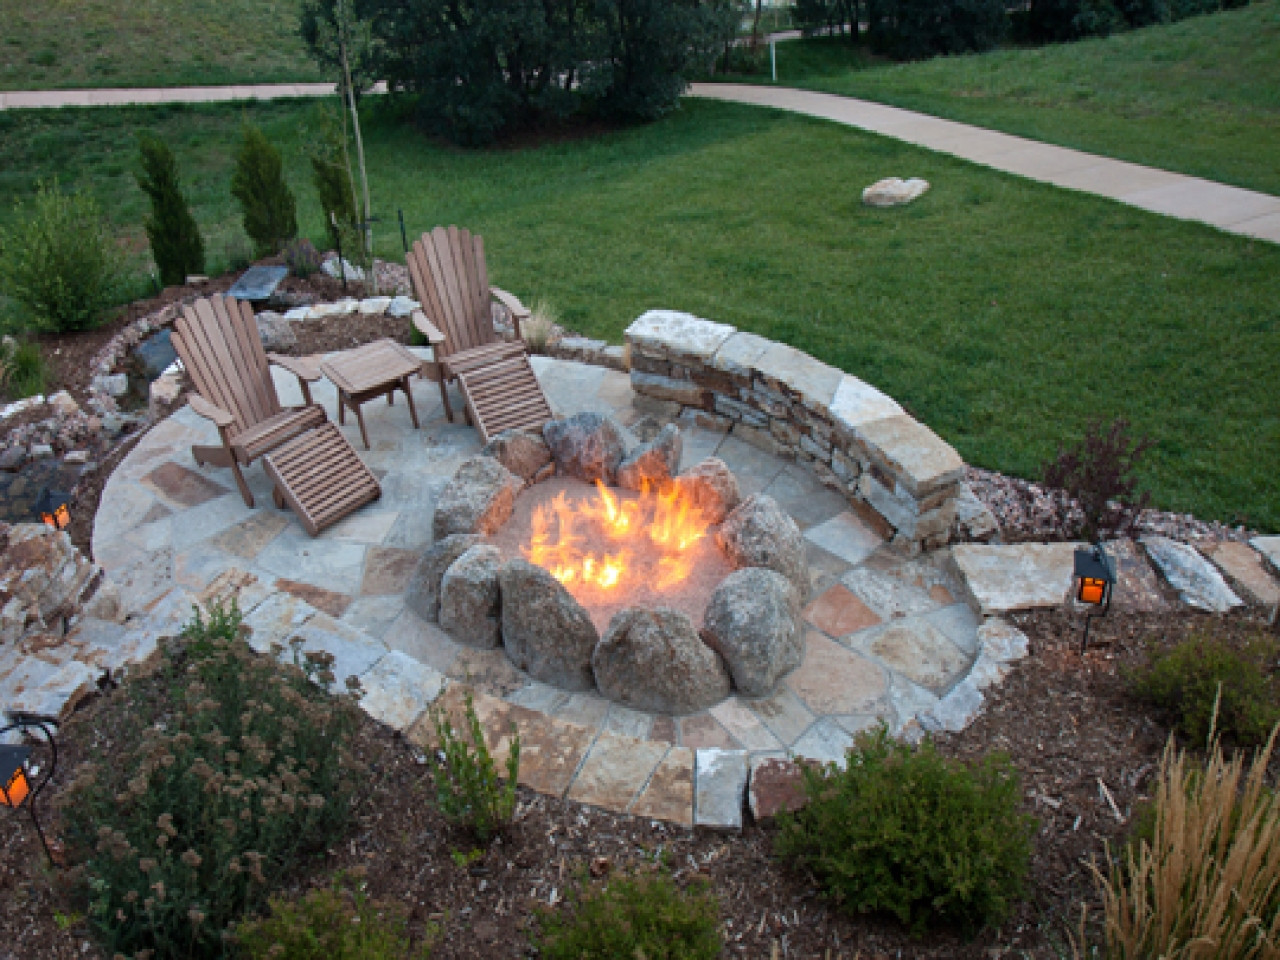 Backyard Design With Fire Pit
 33 DIY Firepit Designs For Your Backyard